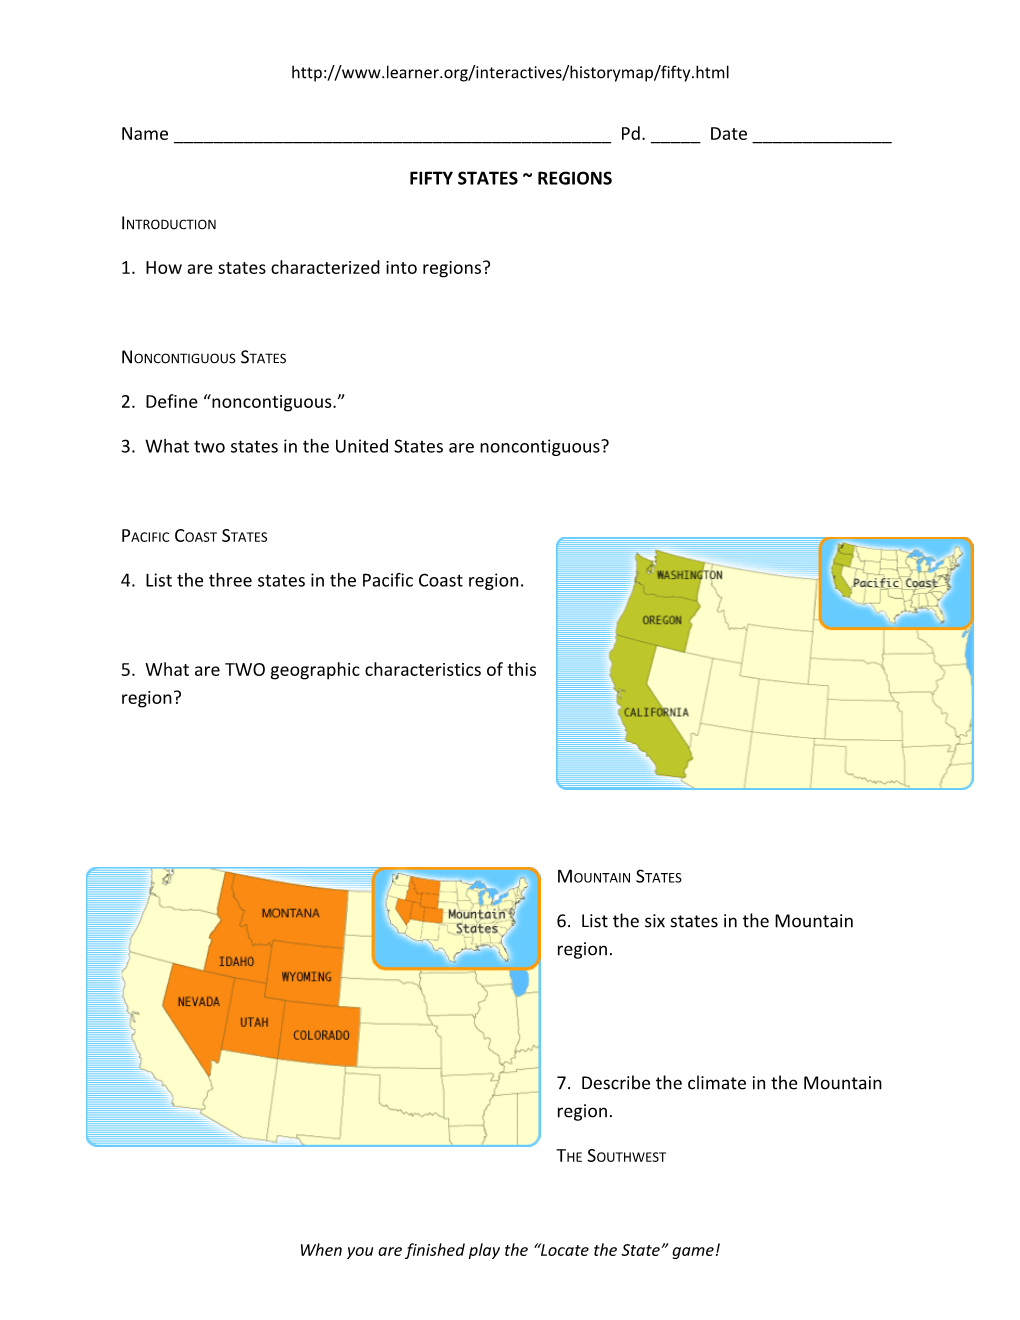 Fifty States Regions